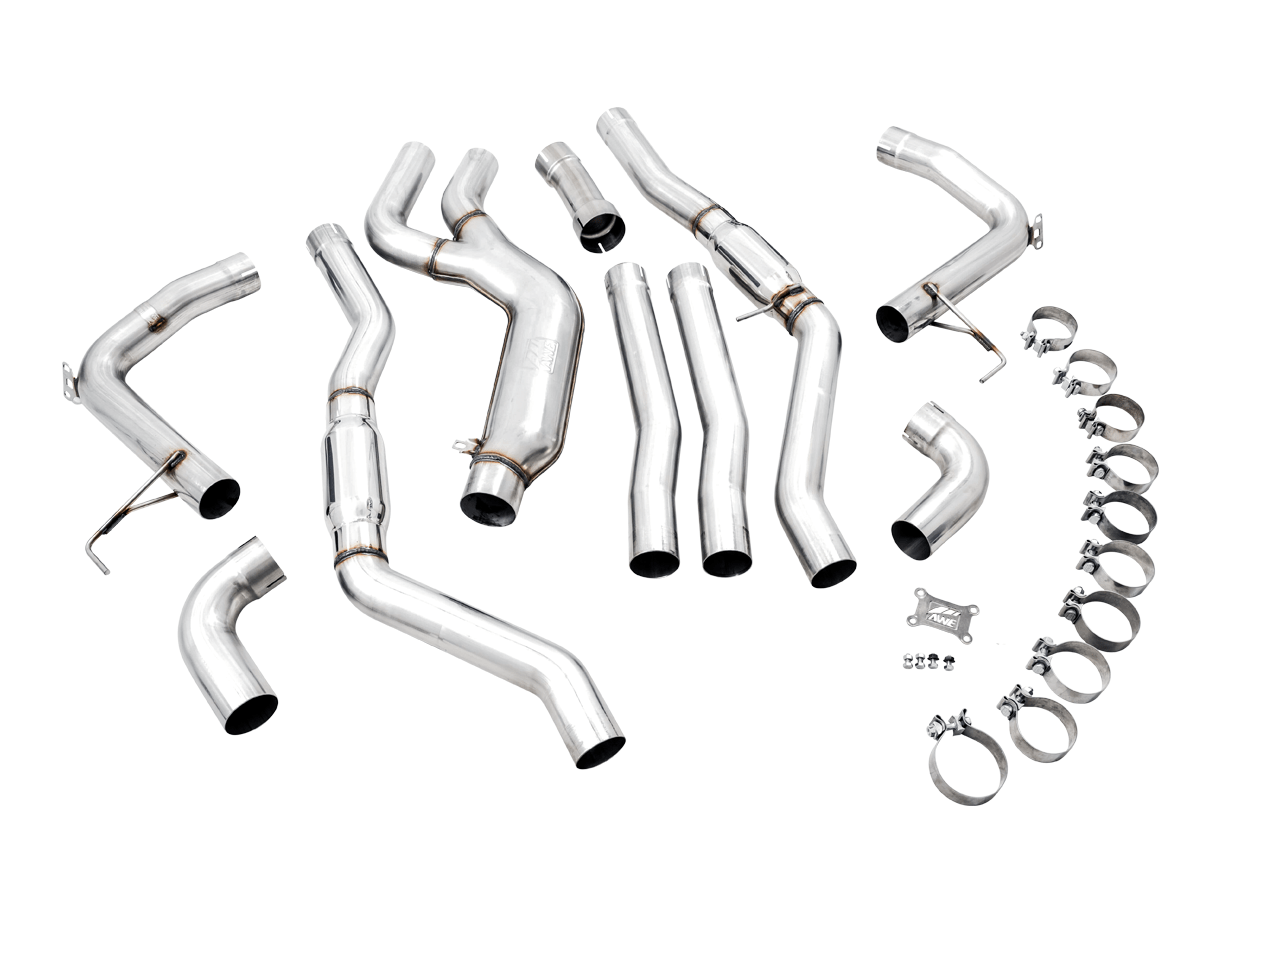 Kies-Motorsports AWE Tuning AWE EXHAUST SUITE FOR THE BMW G2X M340I / M440I